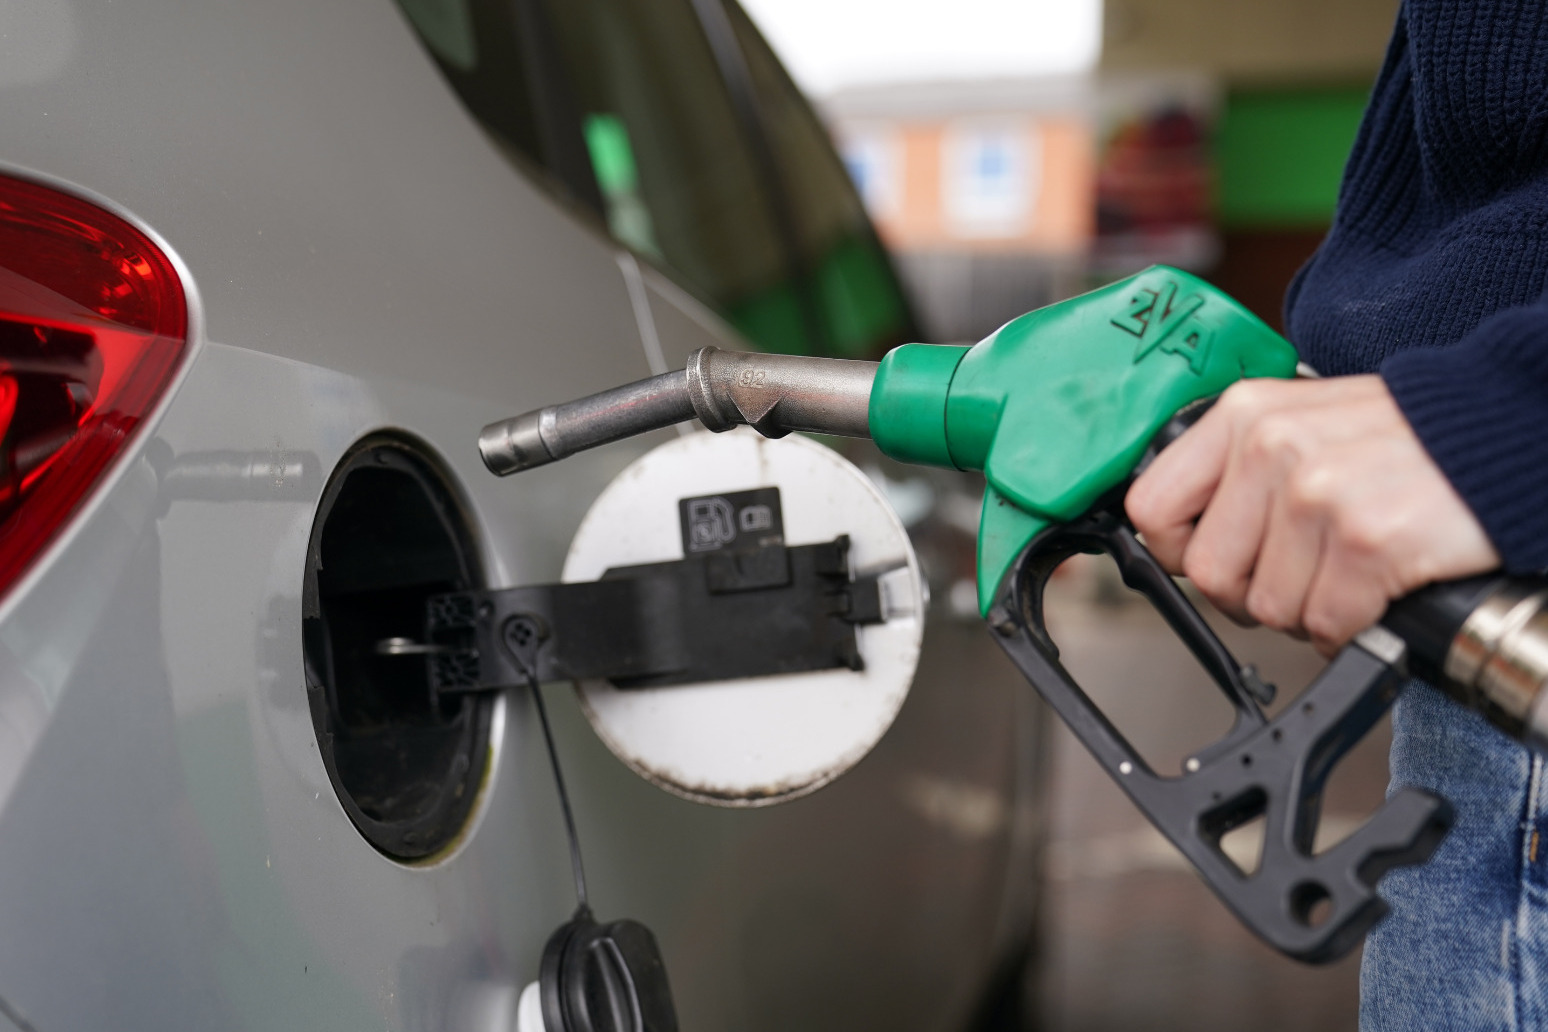 Fuel prices fall again in February yet diesel drivers continue to be hit 